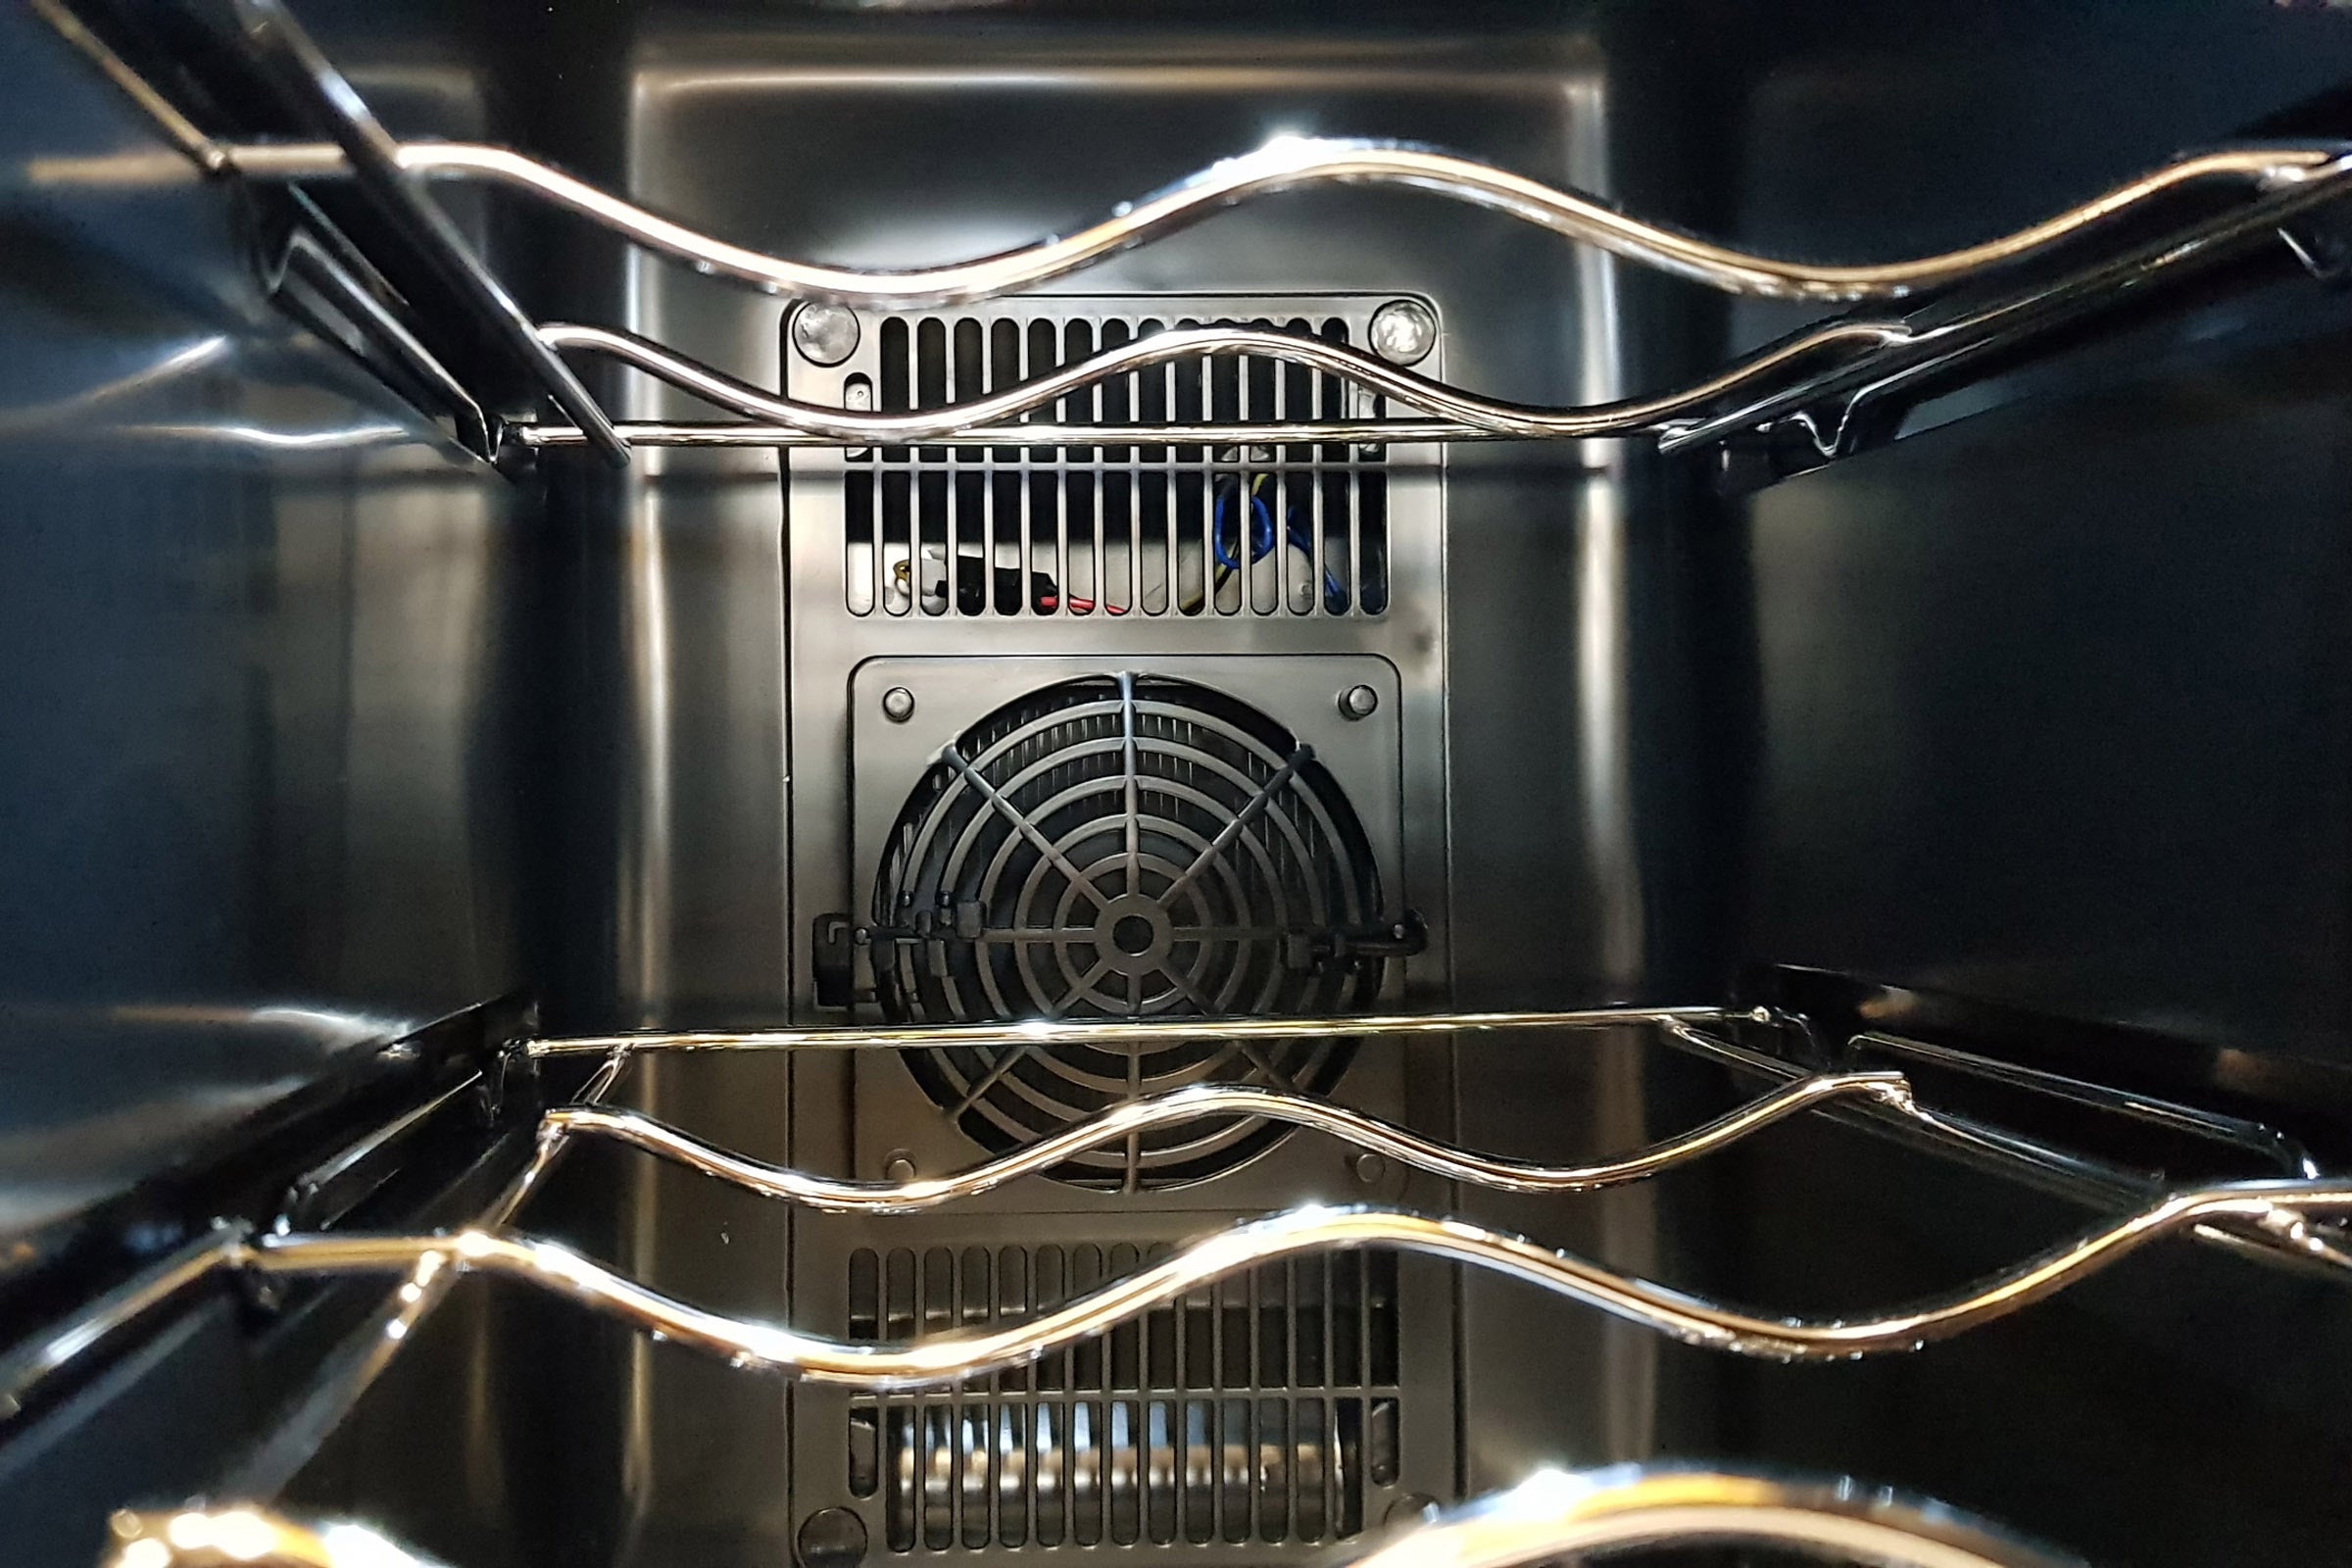 Interior view of Russell Hobbs RH8WC2 wine cooler